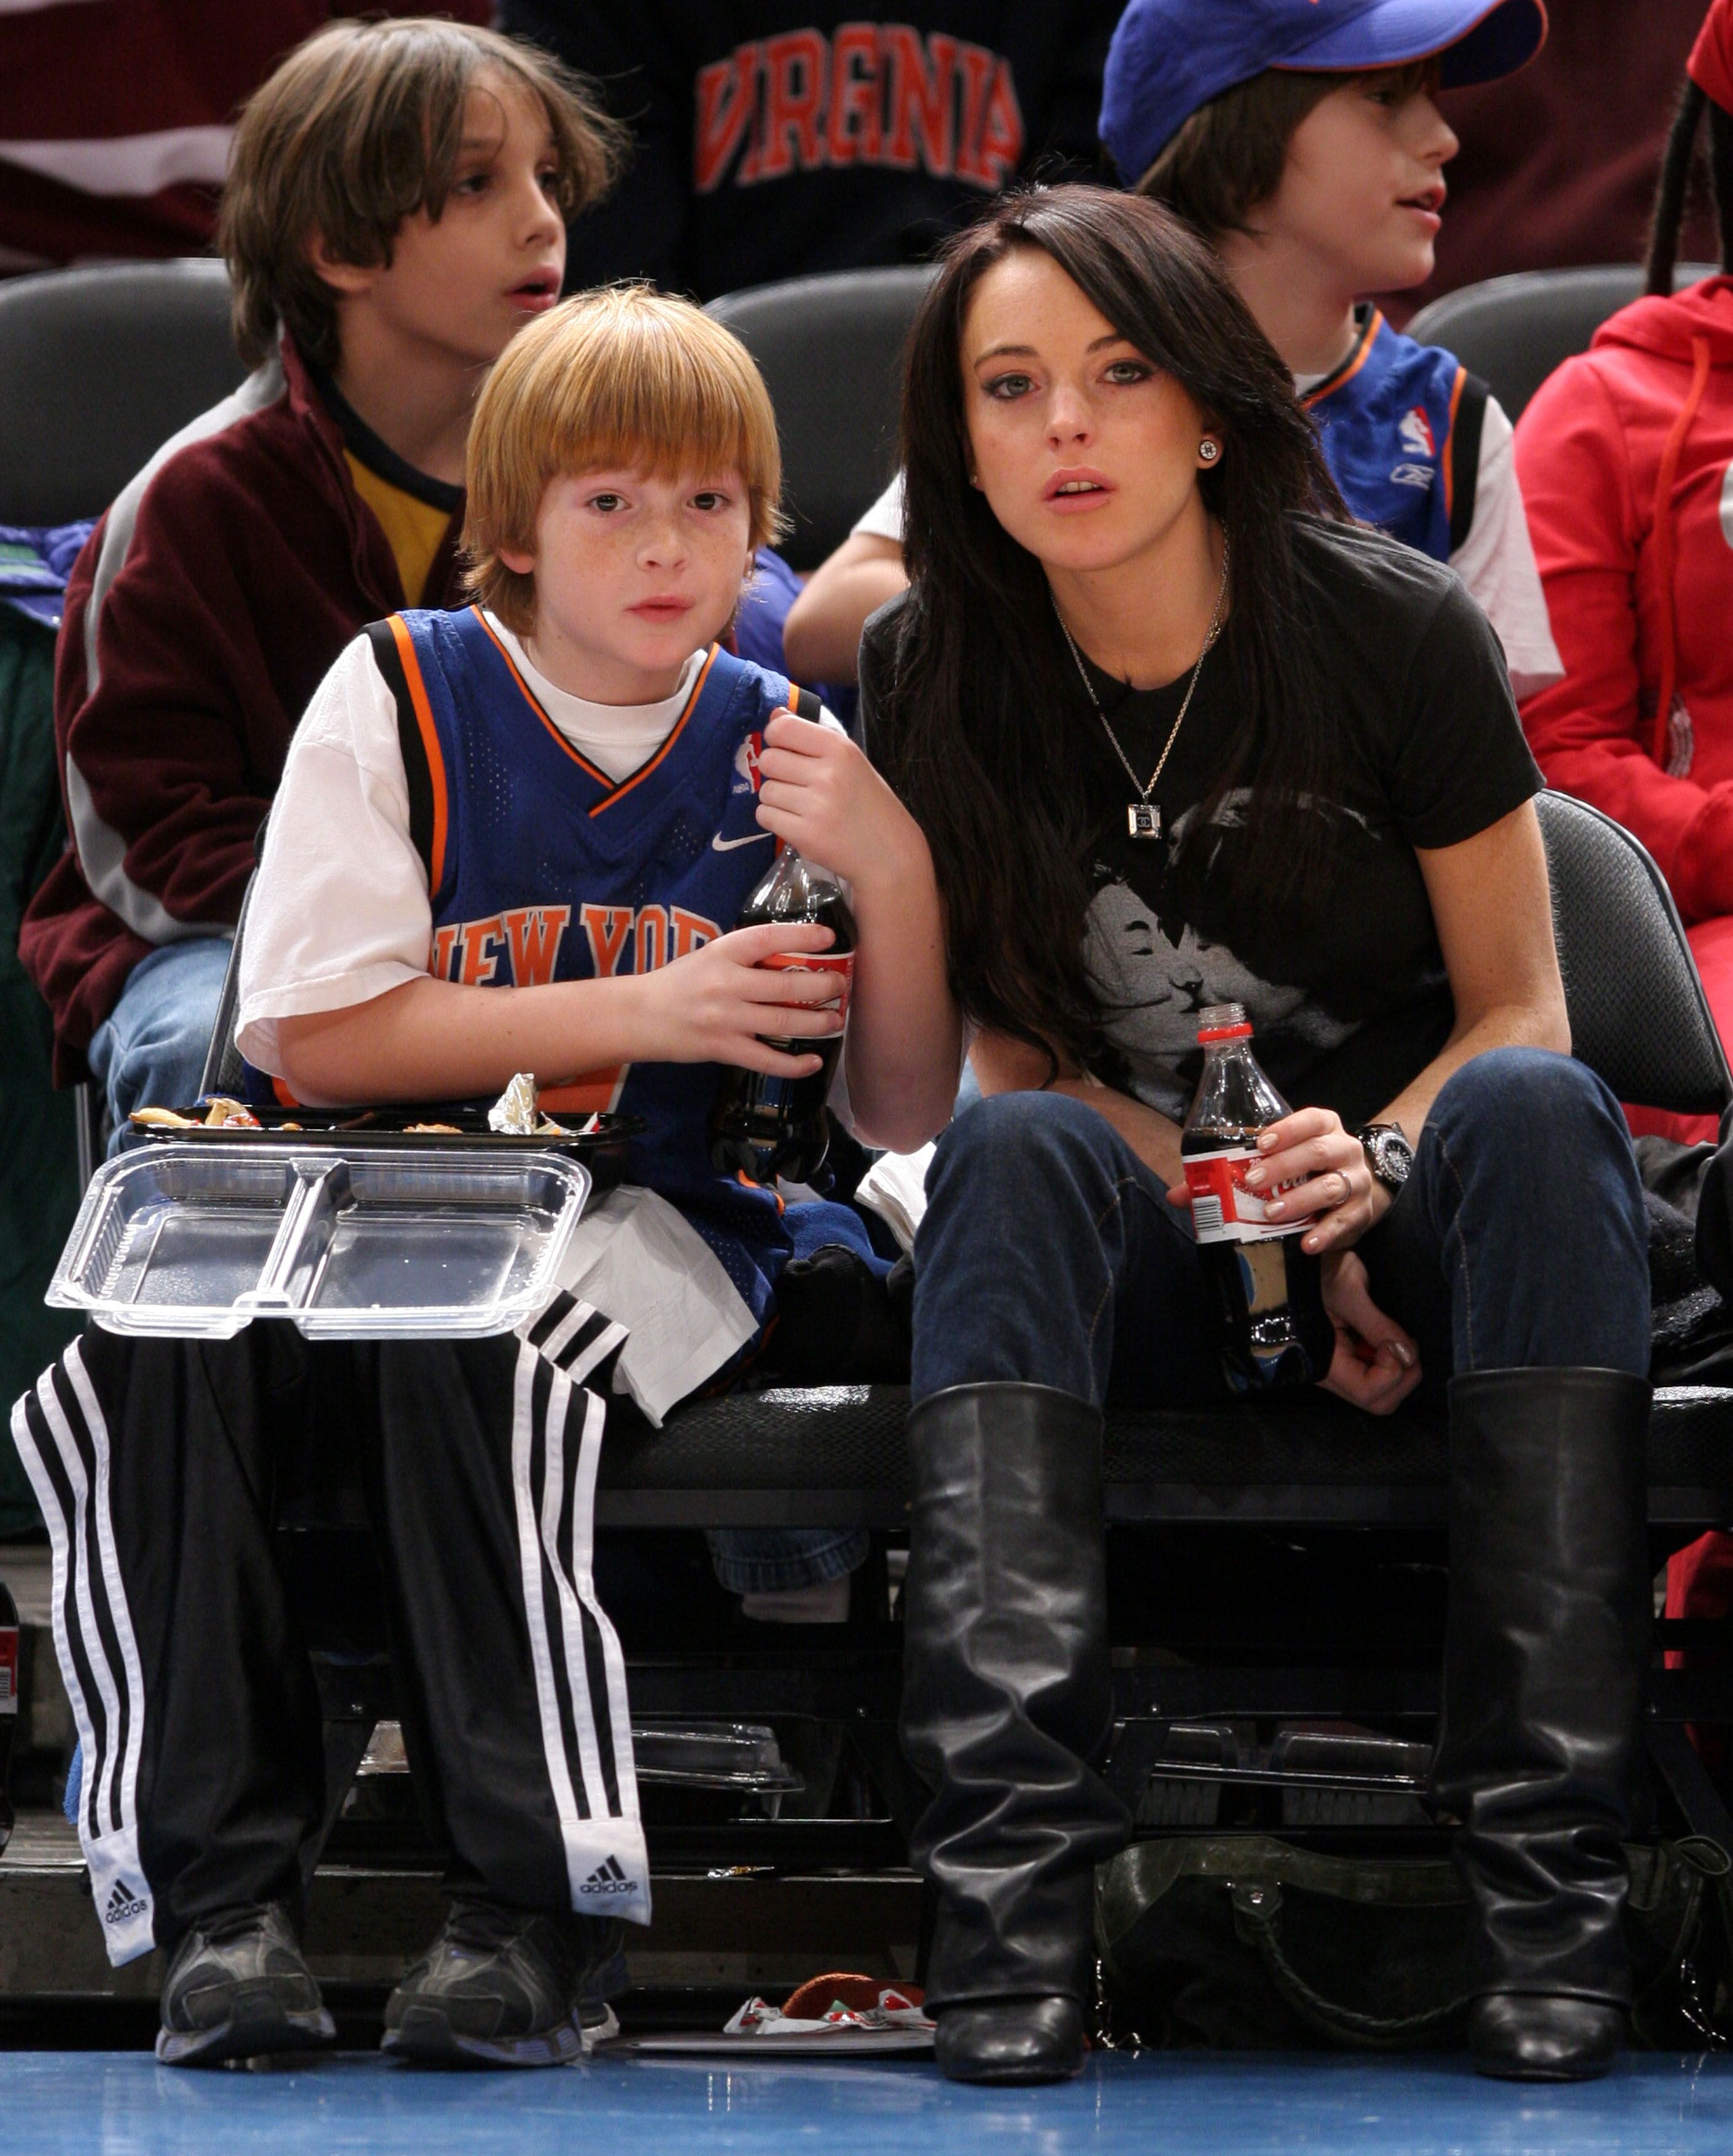 Dakota and Lindsay Lohan during the Utah Jazz vs New York Knicks Game - December 23, 2005 at Madison Square Garden in New York City, New York, United States. | Source: Getty Images